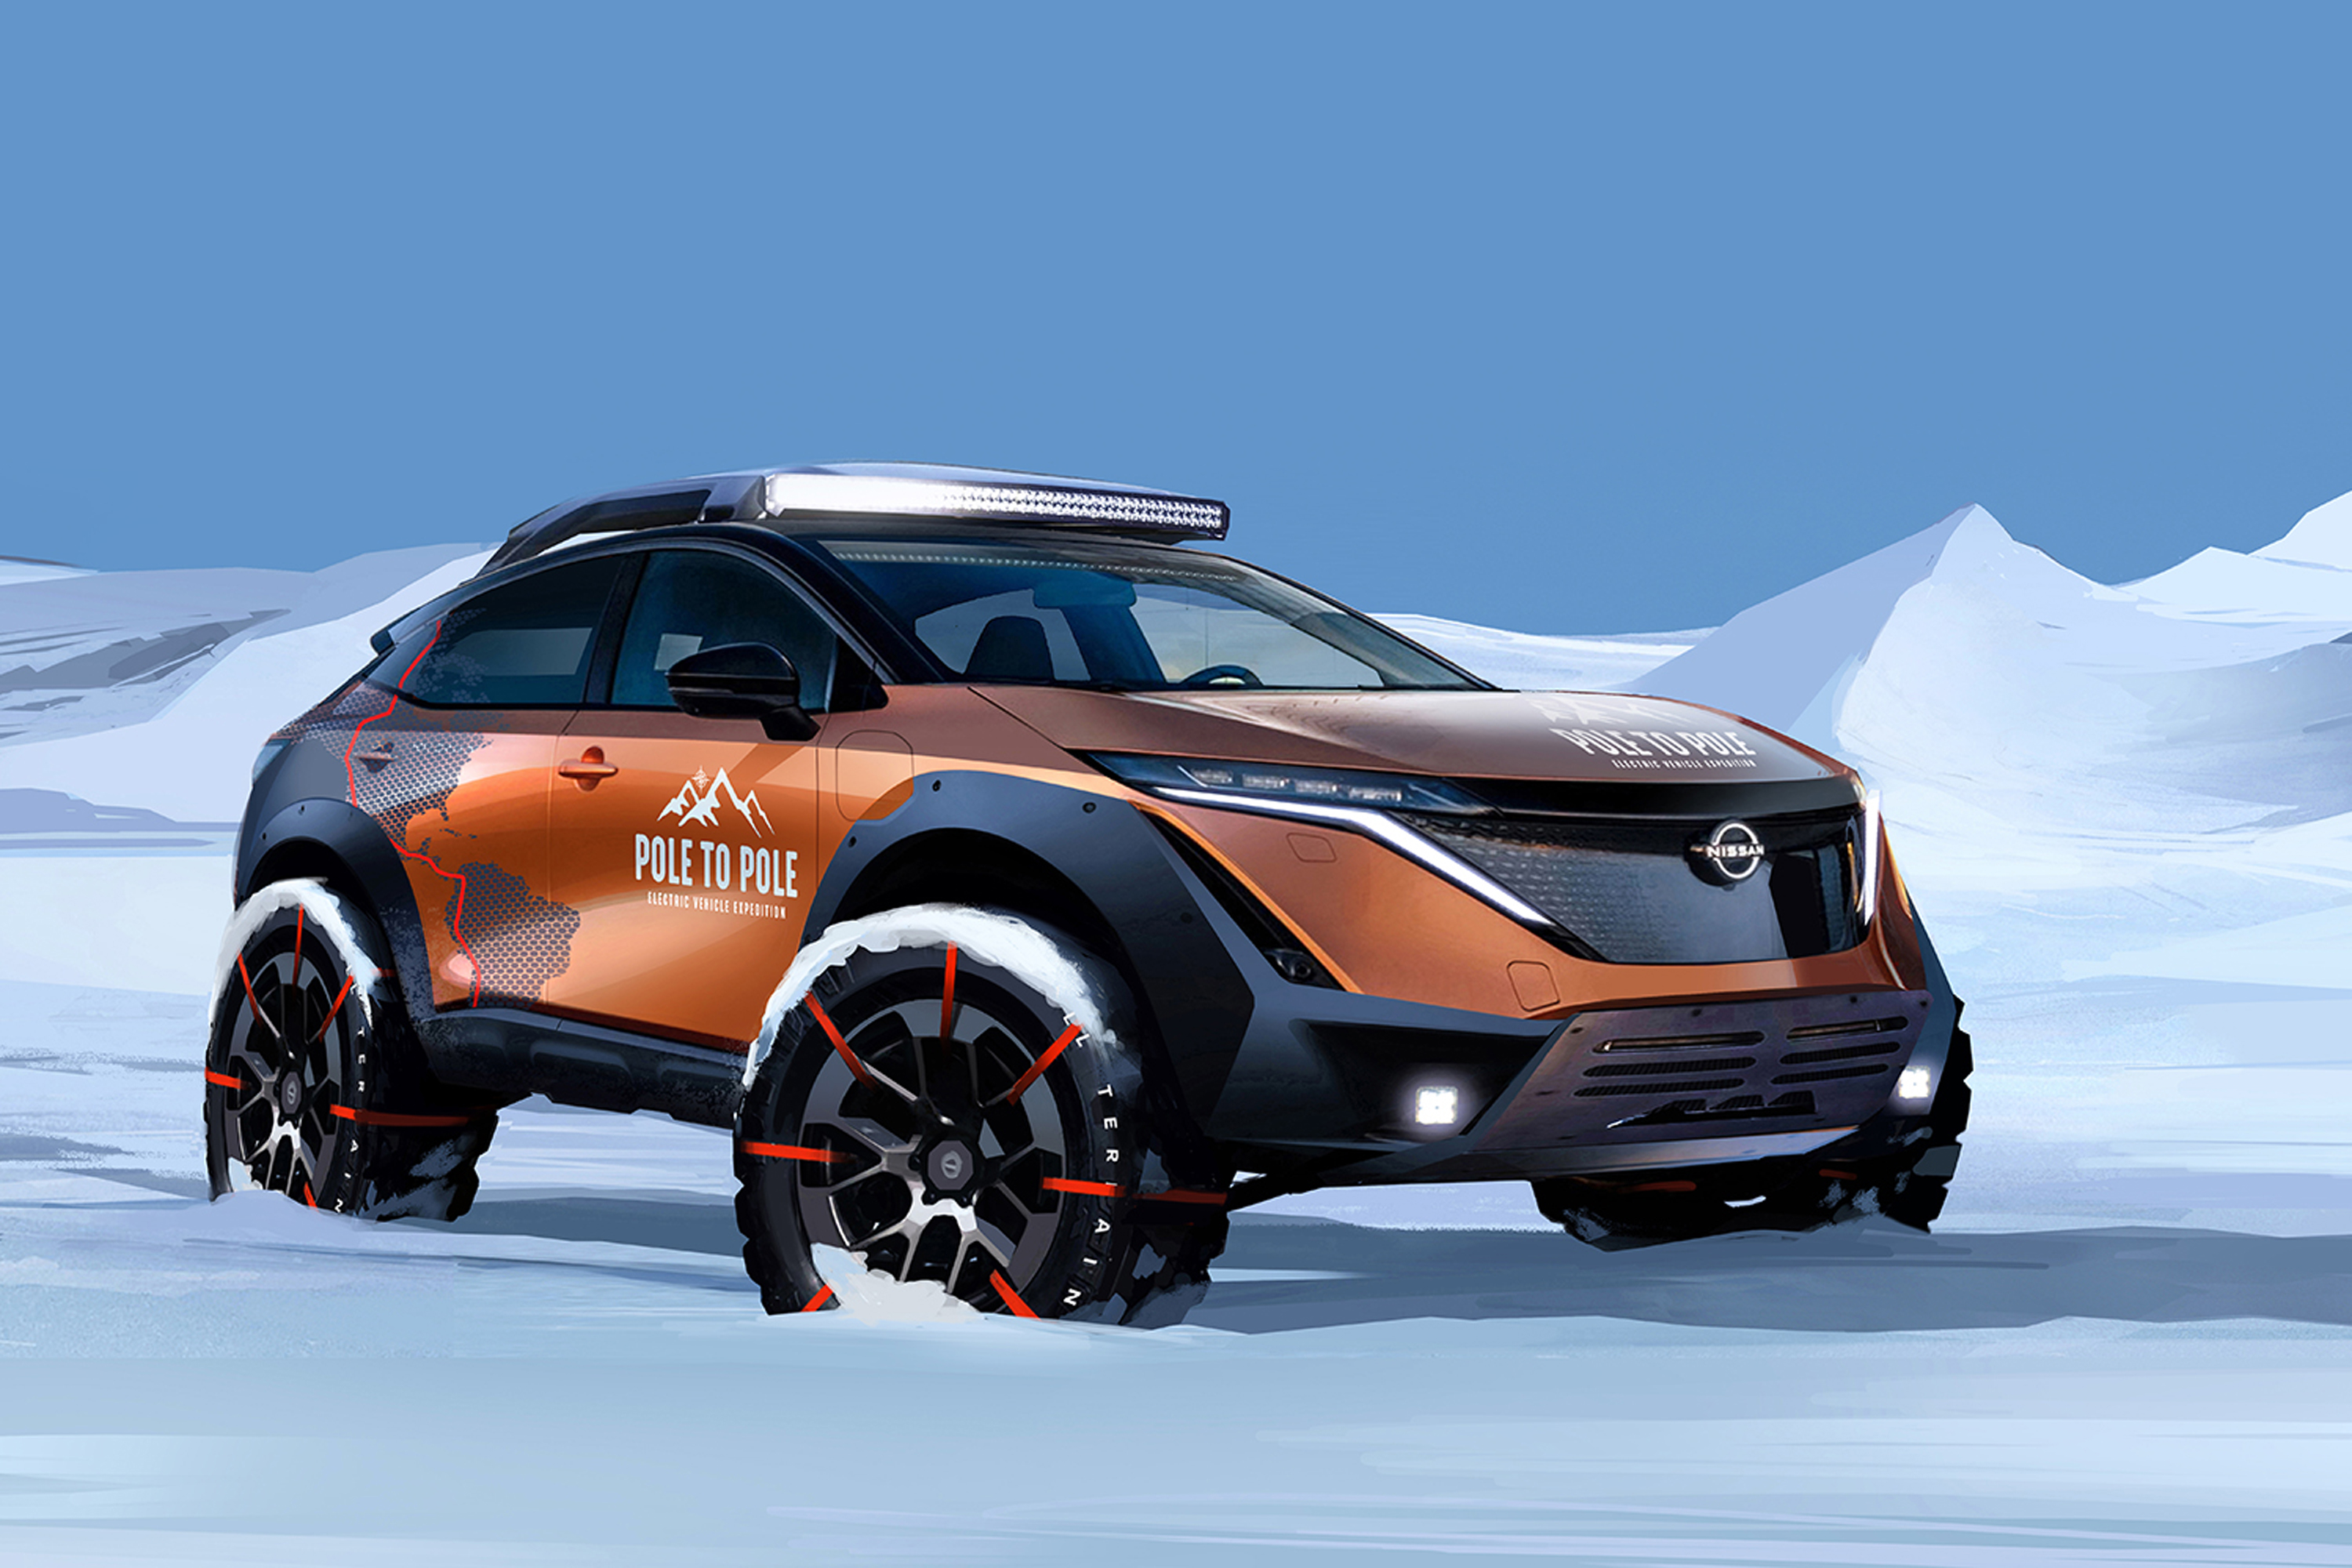 Electric Nissan Ariya Will Go 17,000 Miles on North to South Pole Journey